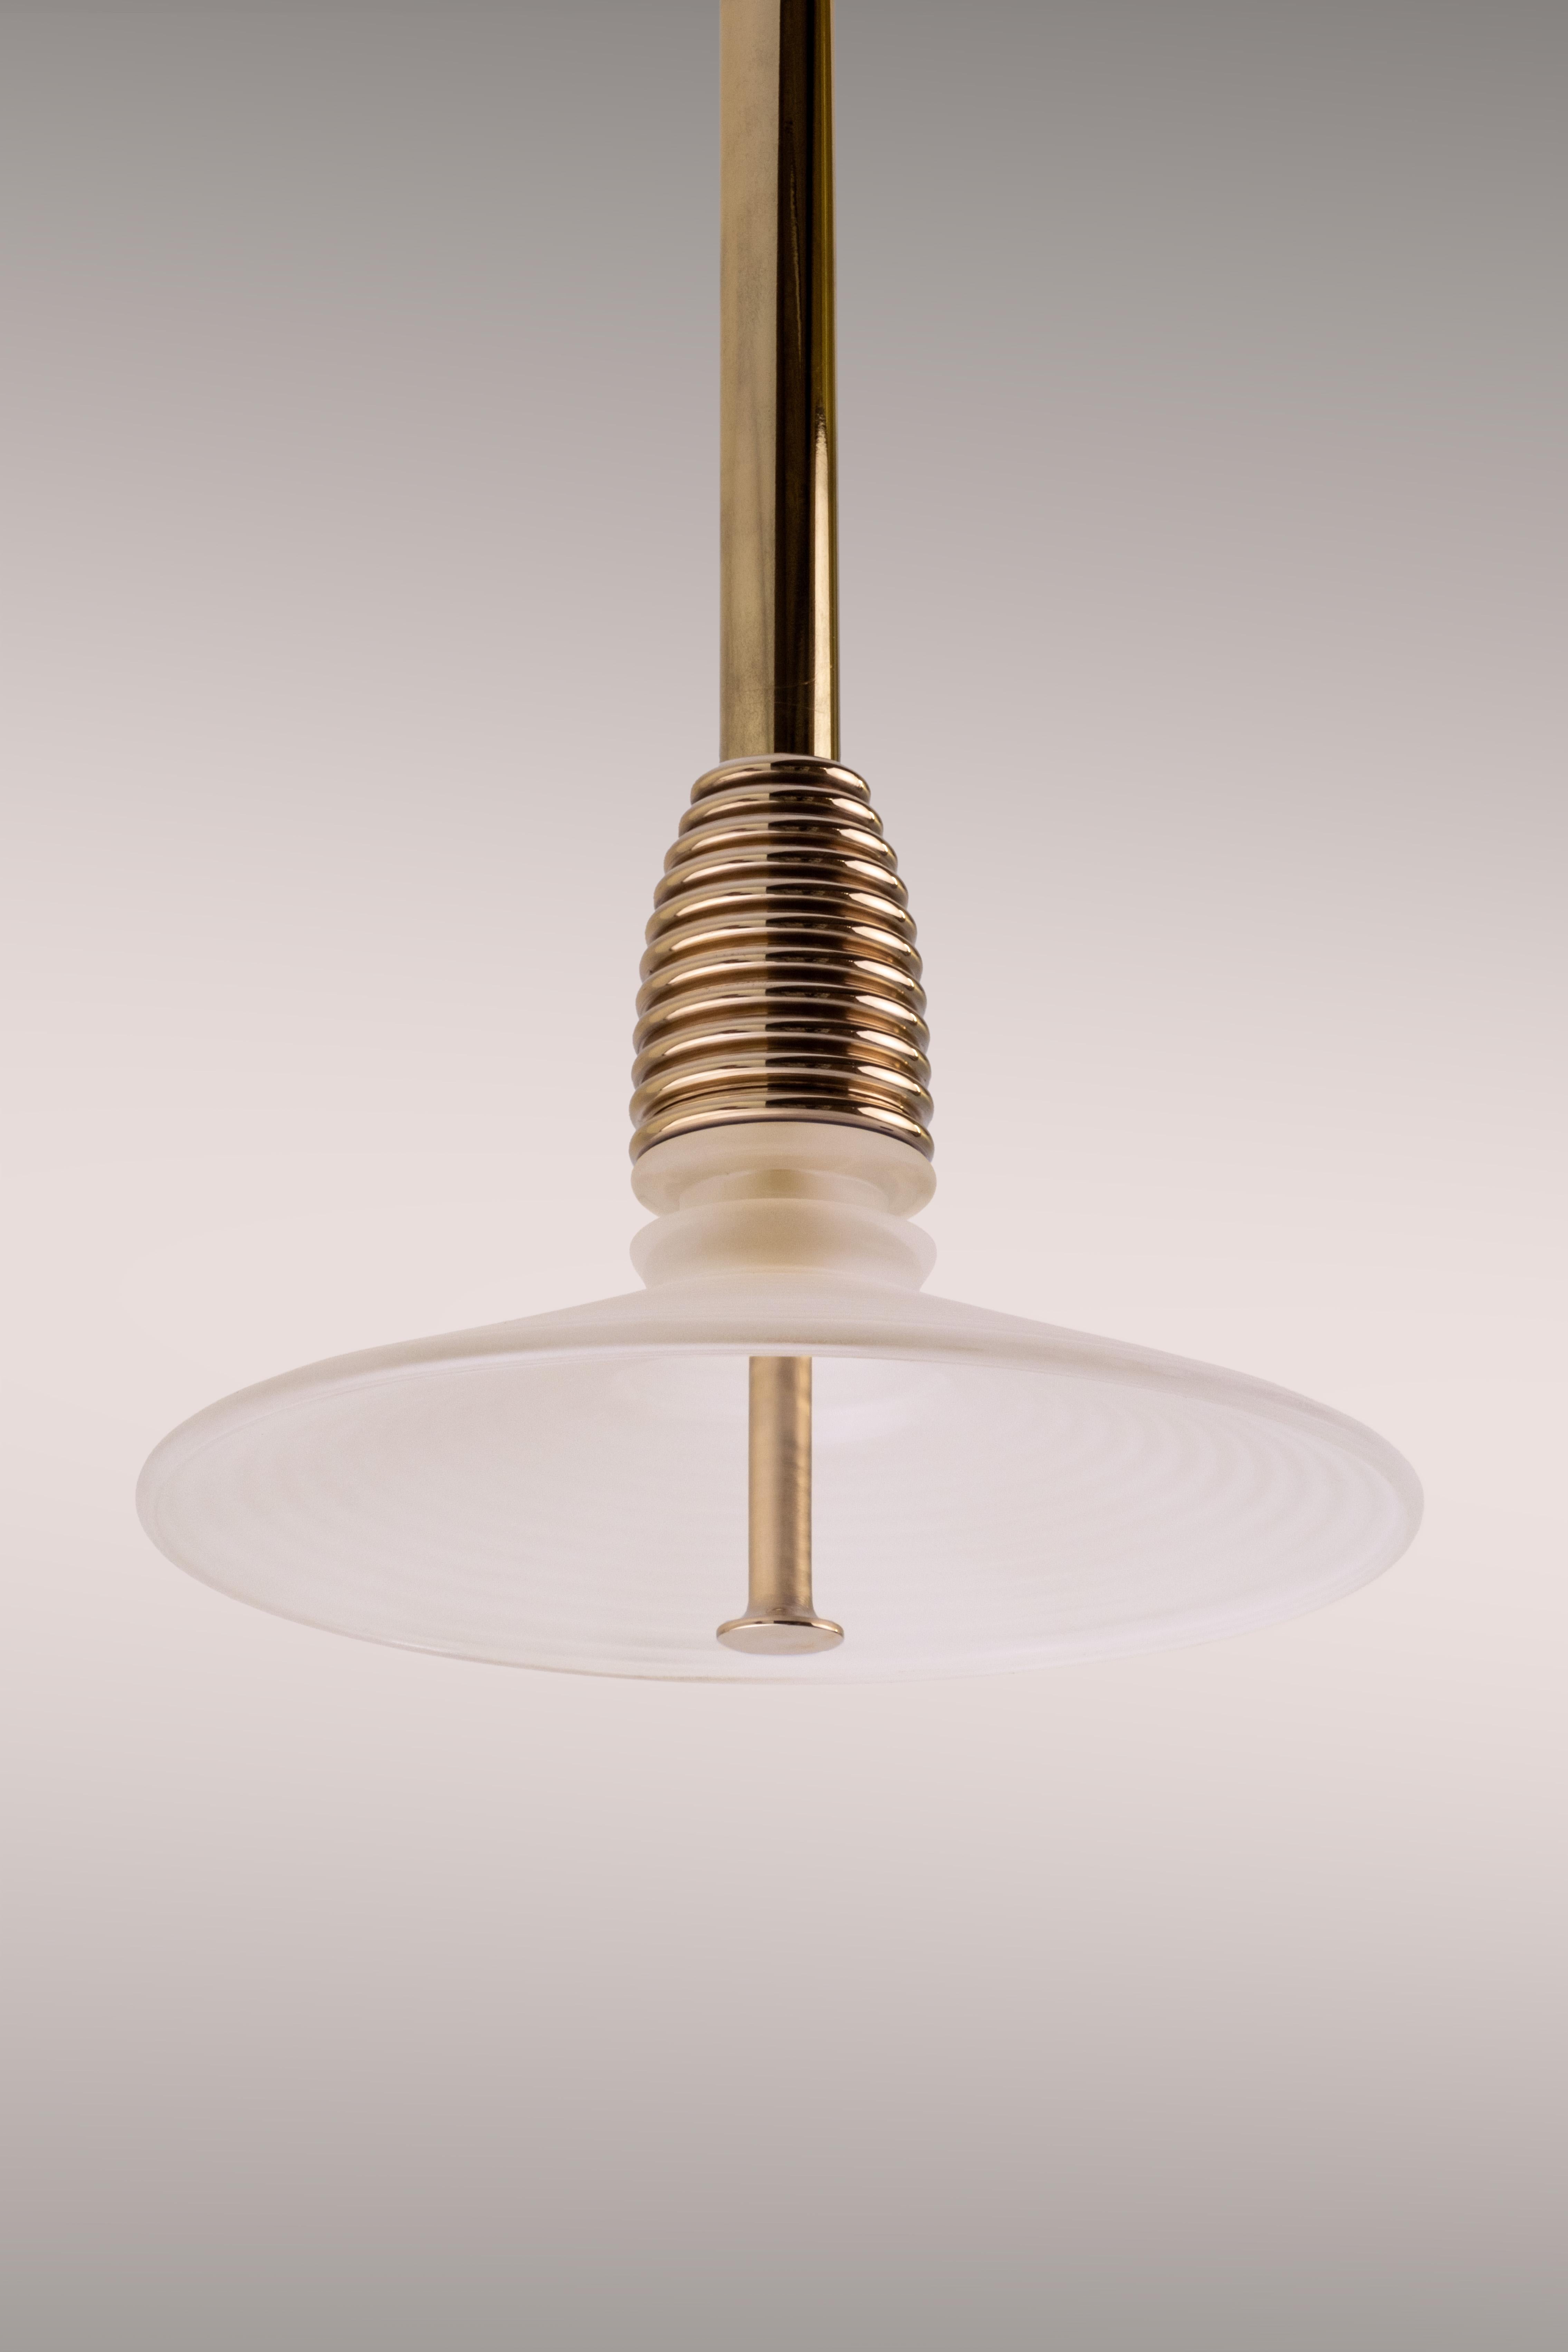 The Insulator 'B' Pendant in dark brass and frosted glass by NOVOCASTRIAN deco In New Condition For Sale In Washington, GB